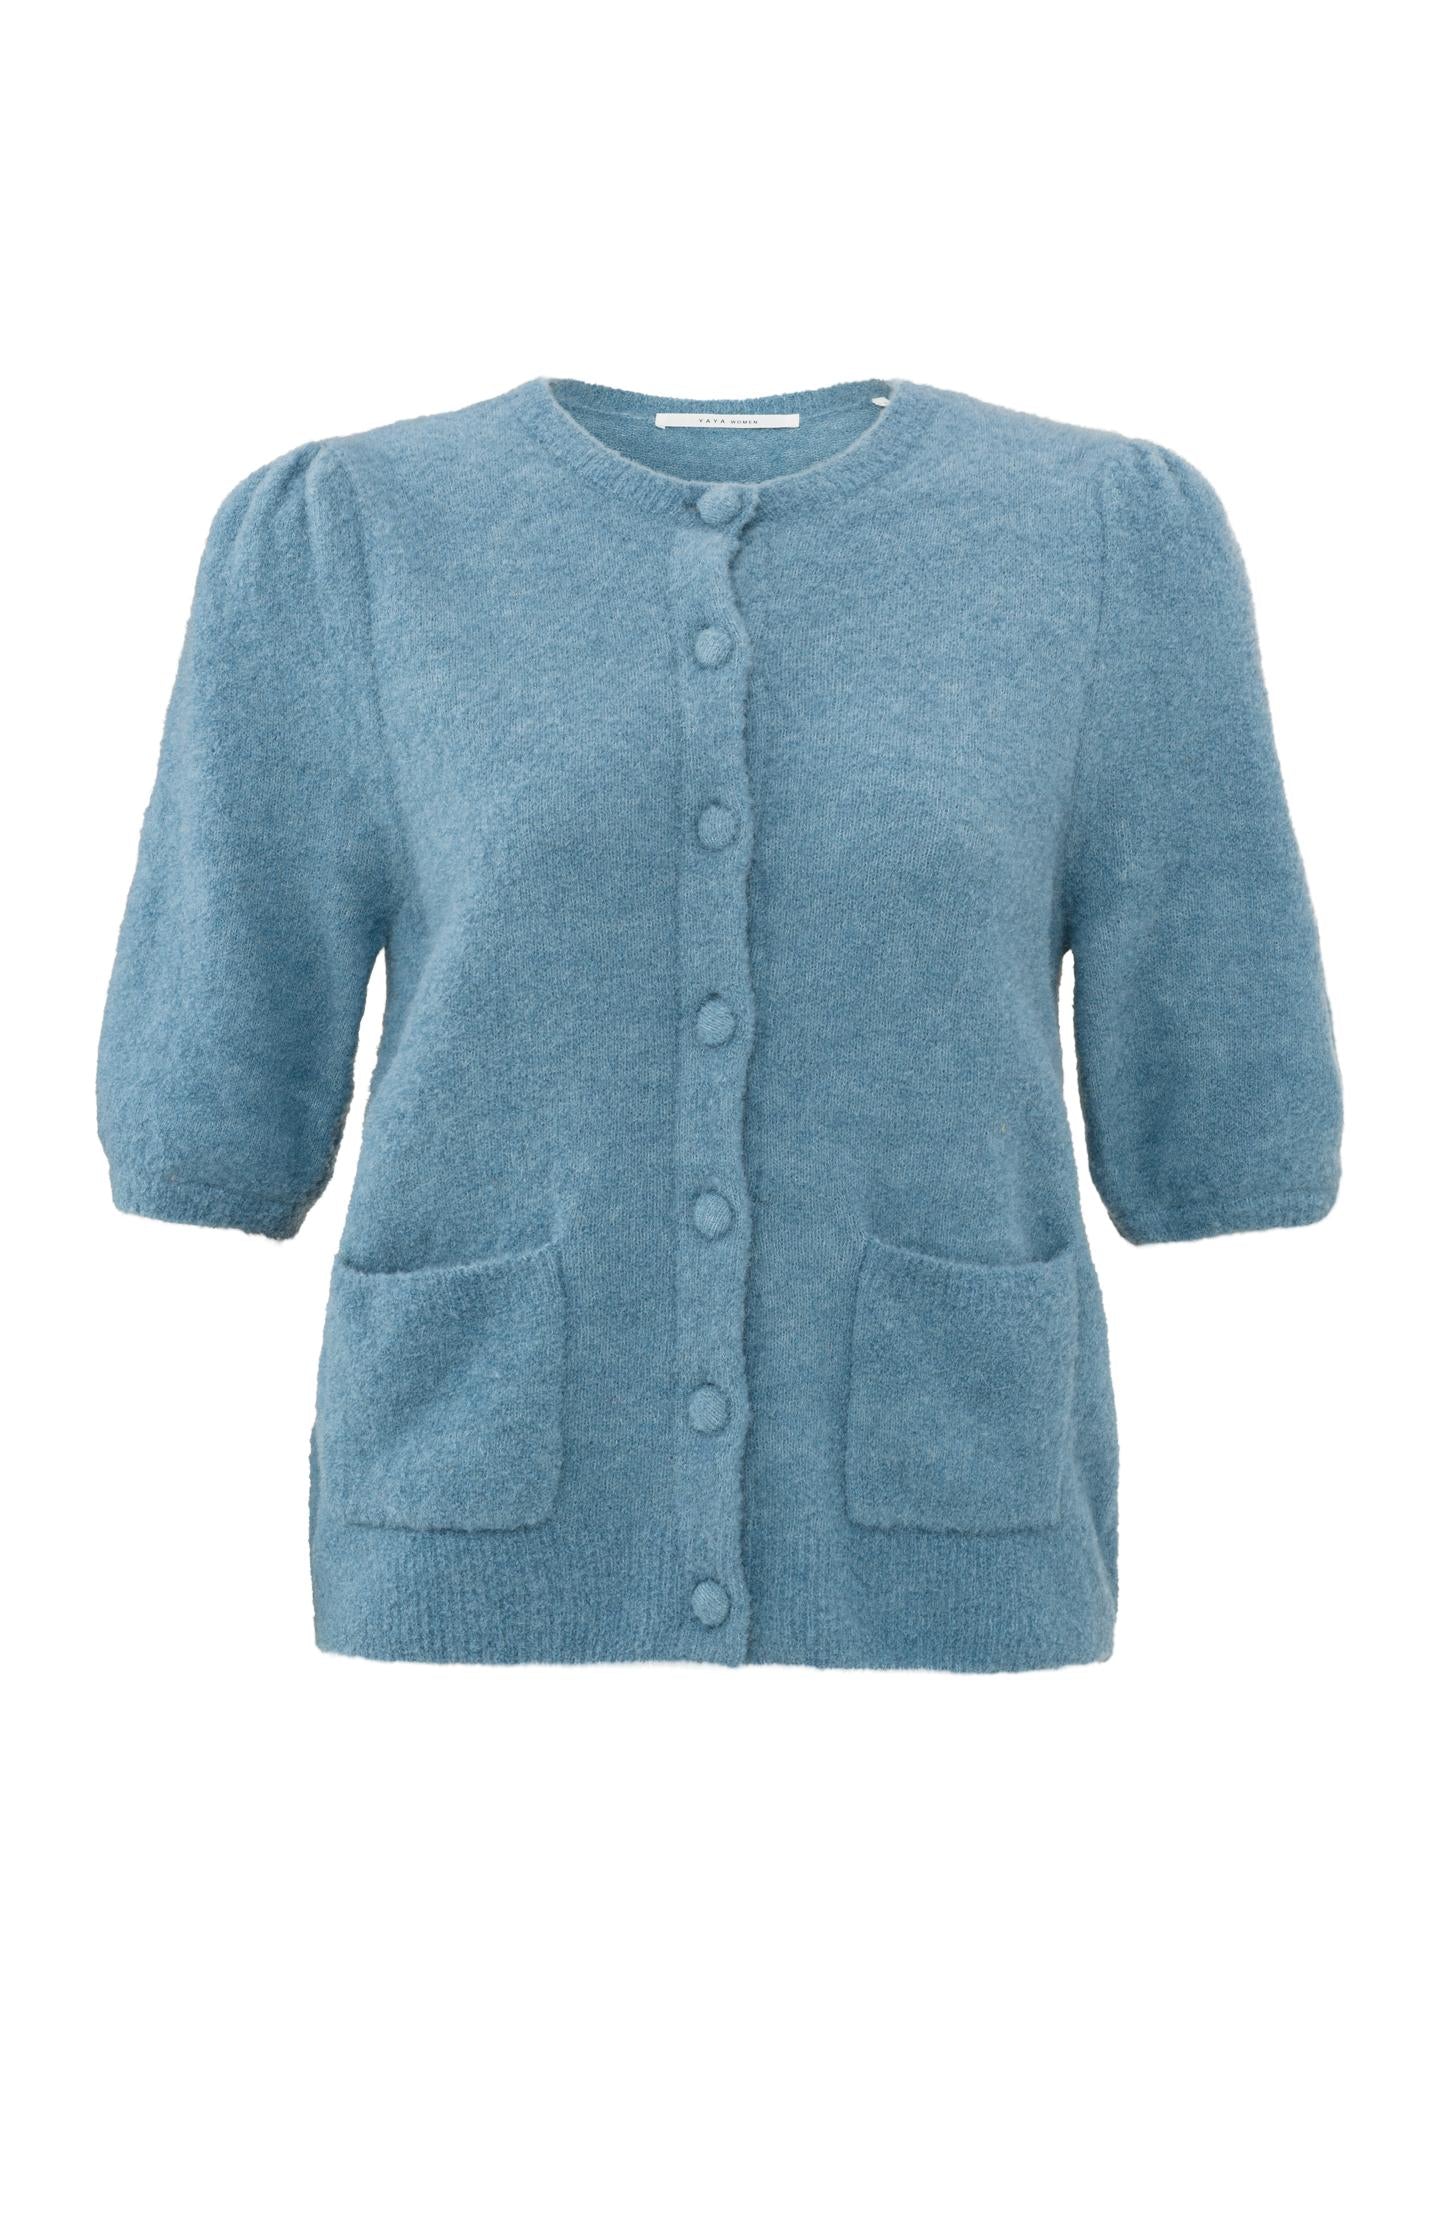 Cardigan with crewneck, short puff sleeves and buttons - Type: product